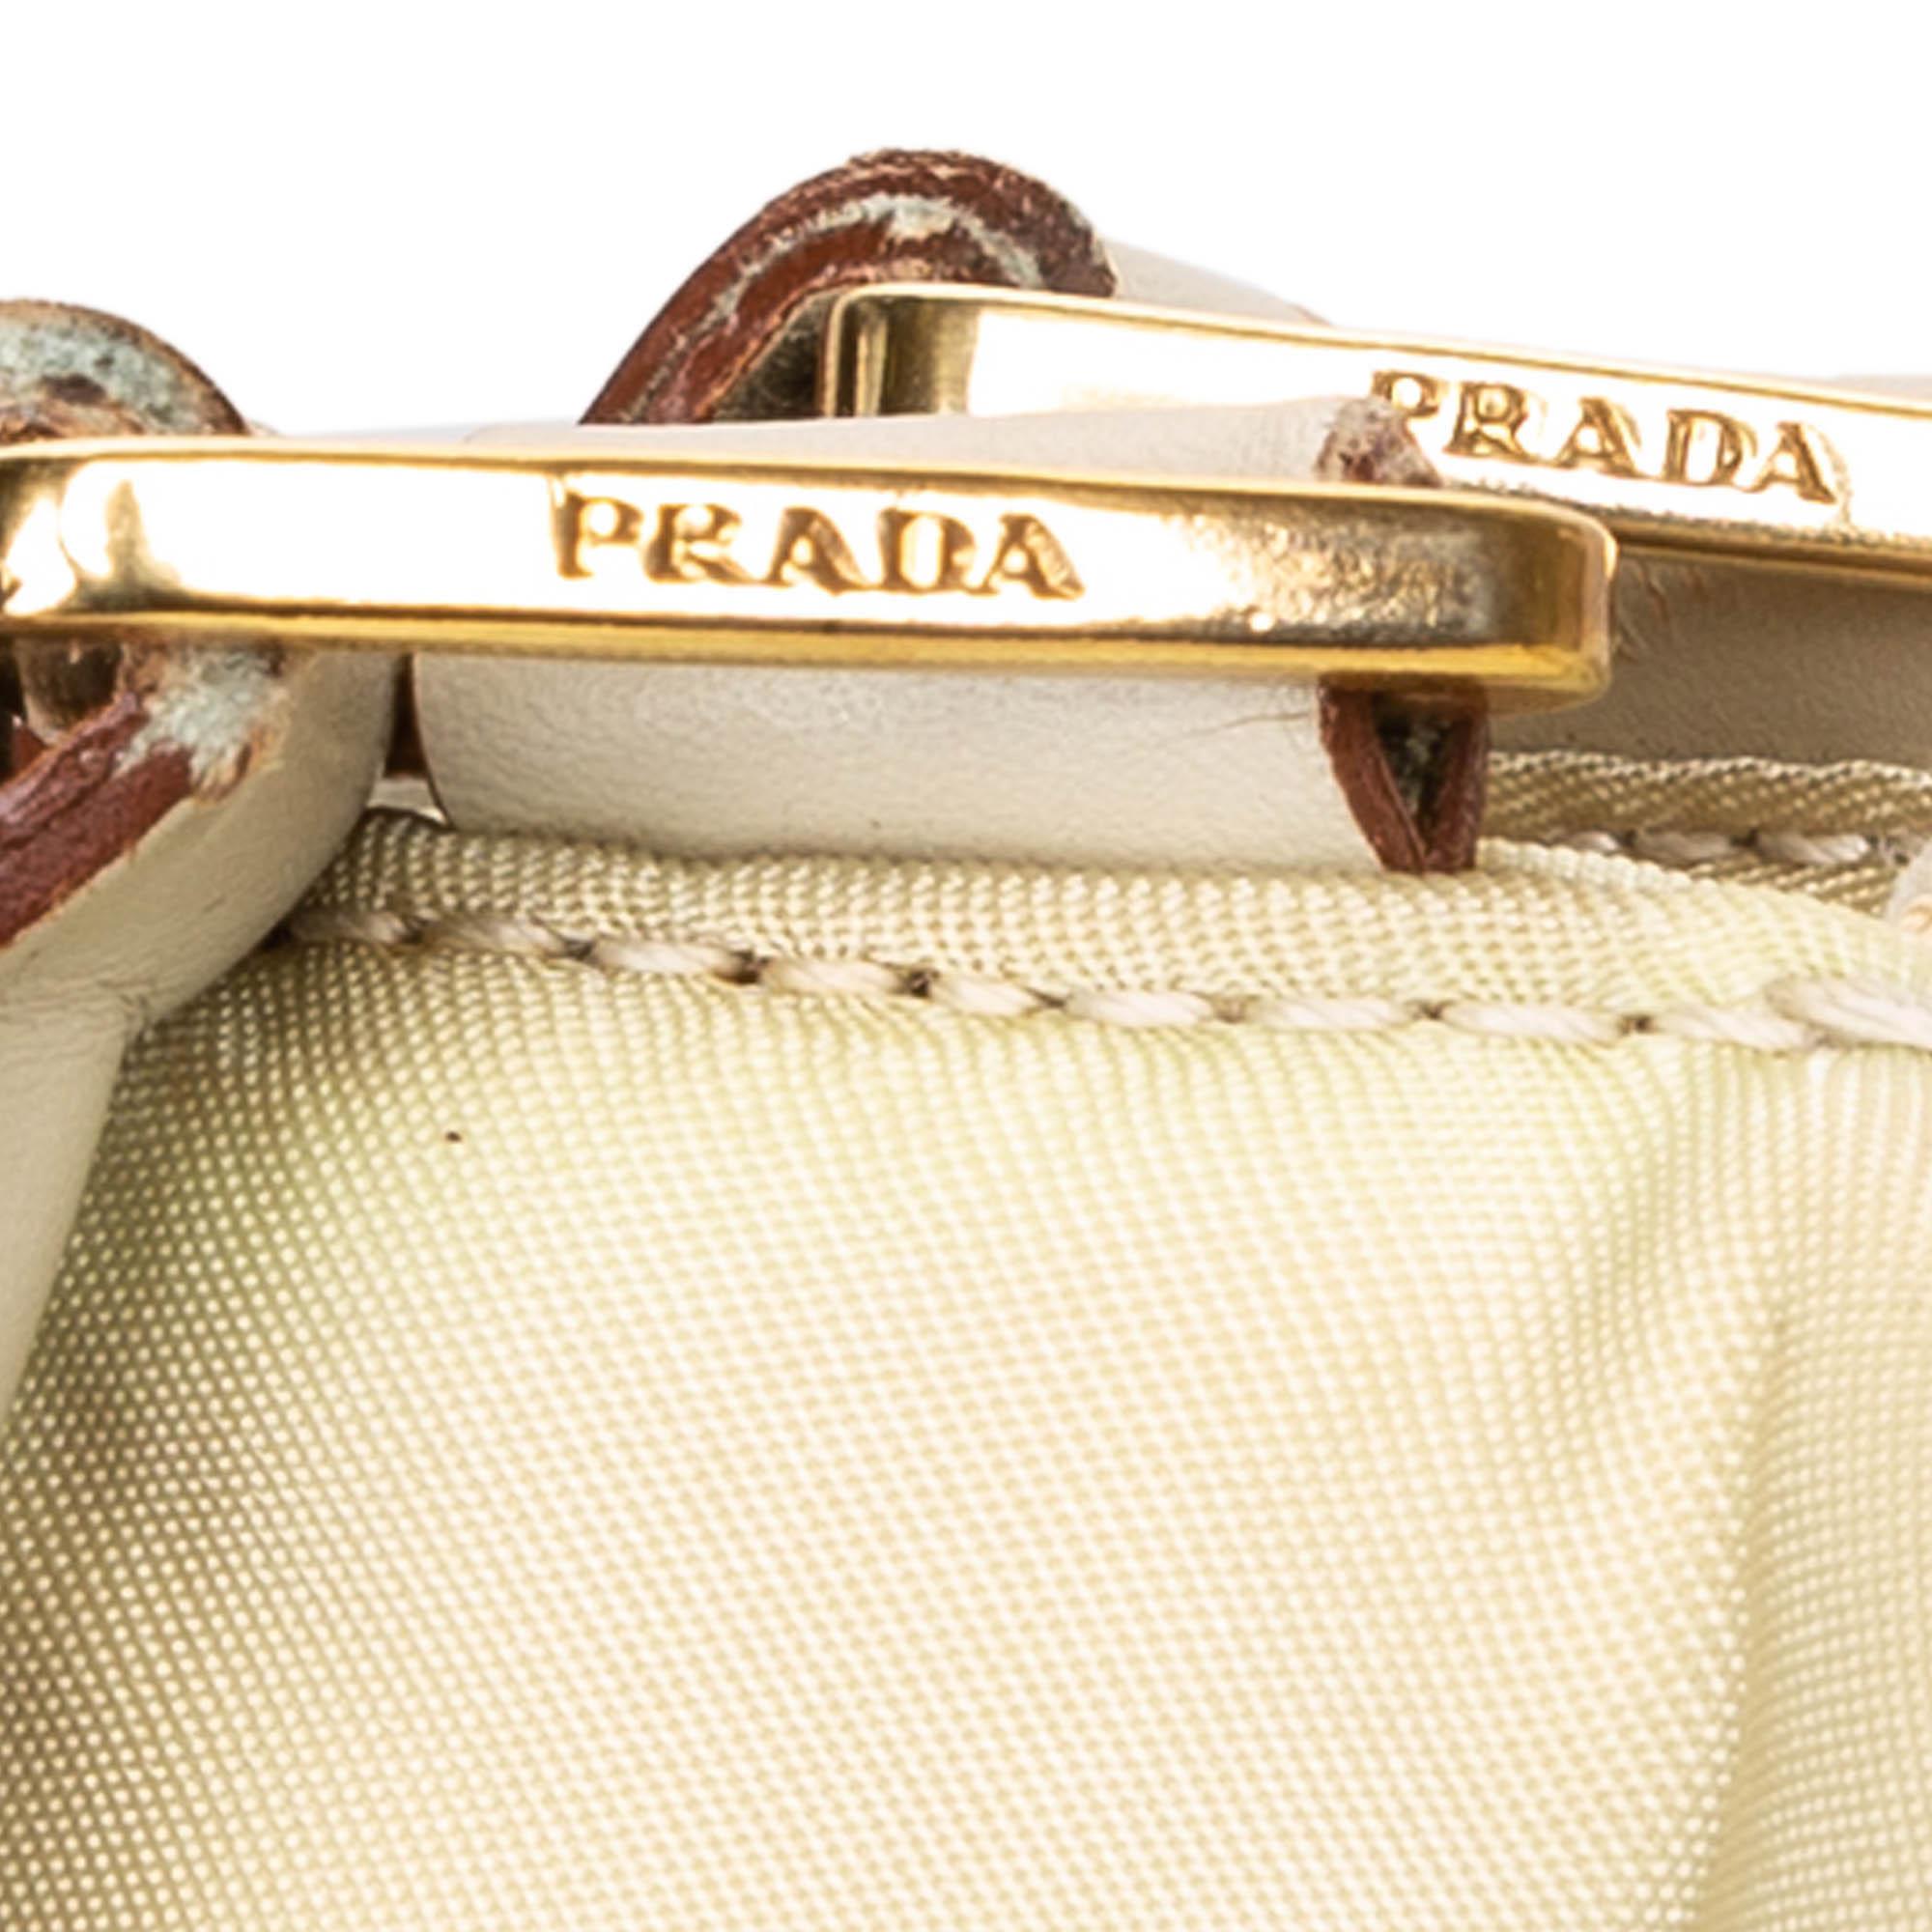 Vintage Authentic Prada White Handbag Italy w Dust Bag Authenticity Card SMALL  For Sale 4